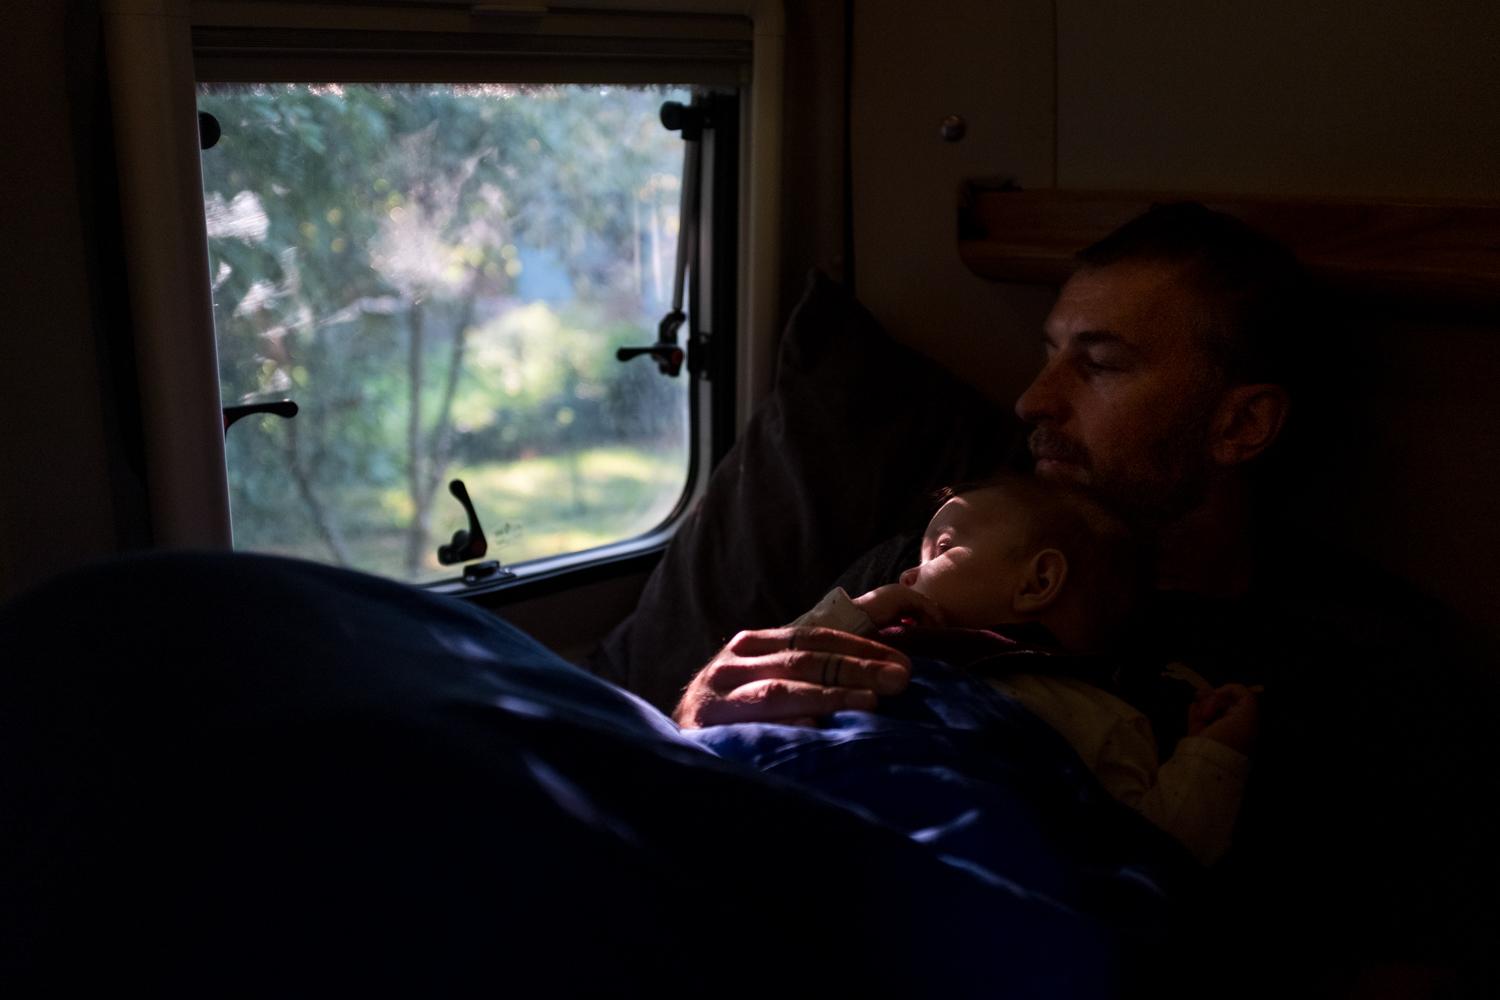 My partner Sebastian holds our six-months-old daughter Nia inside our camper van during a one-month road trip through France. Nia loved waking up surrounded by nature, and living together on ten square meters has brought the three of us even closer together. The COVID-19 pandemic seemed so far away while we were out on the open road. . Alsasce, France, September 09, 2021.